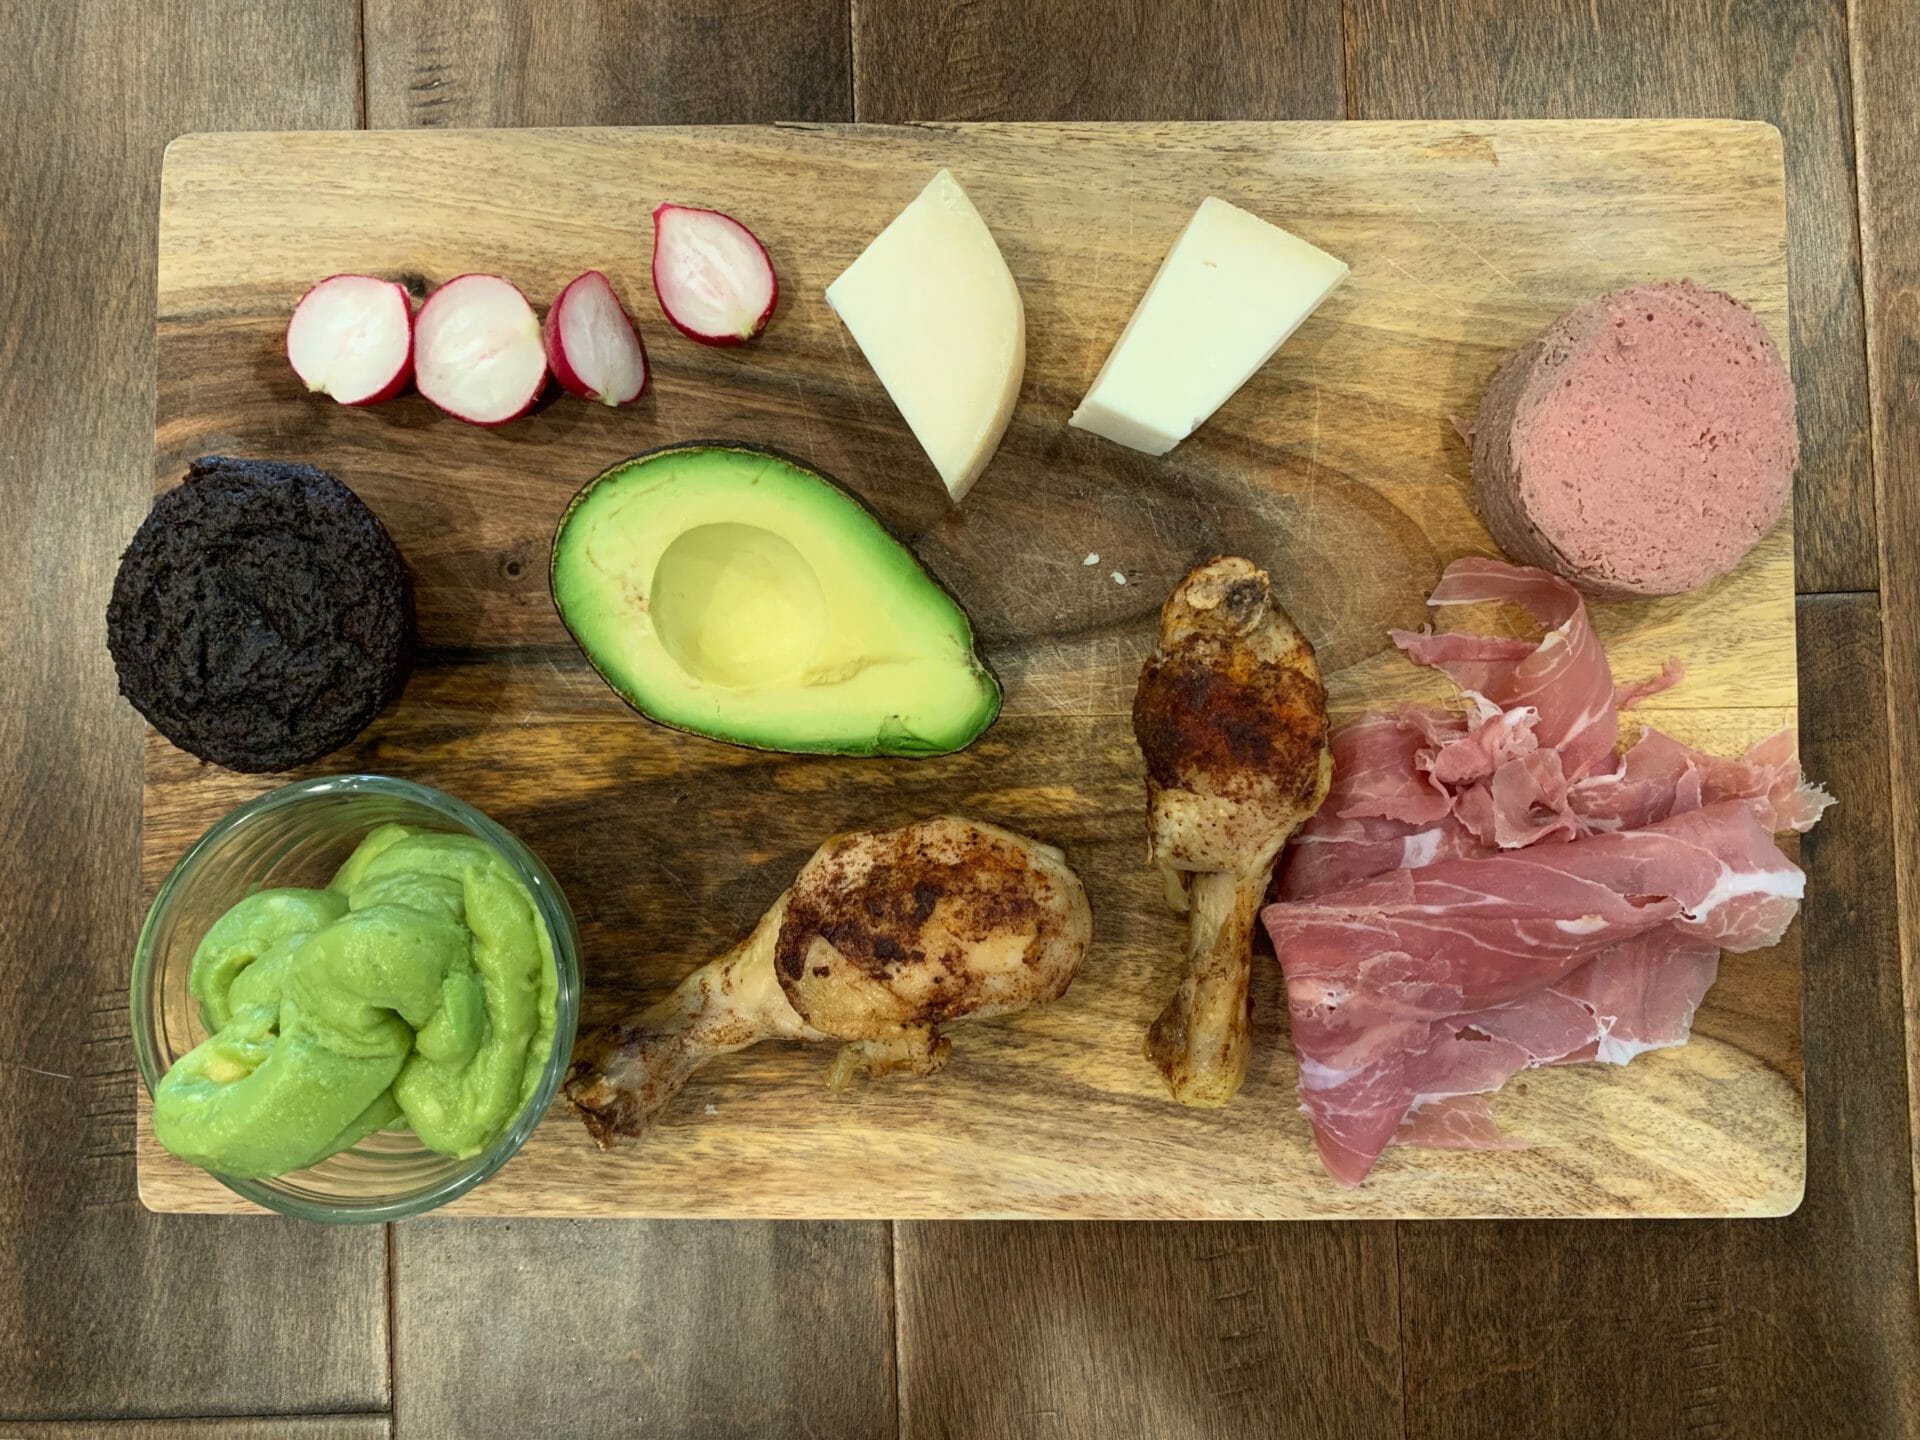 Dinner plate with uncured prosciutto, chicken thighs, avocado, liverwurst, guacamole, goat cheese, radishes and a paleo muffin